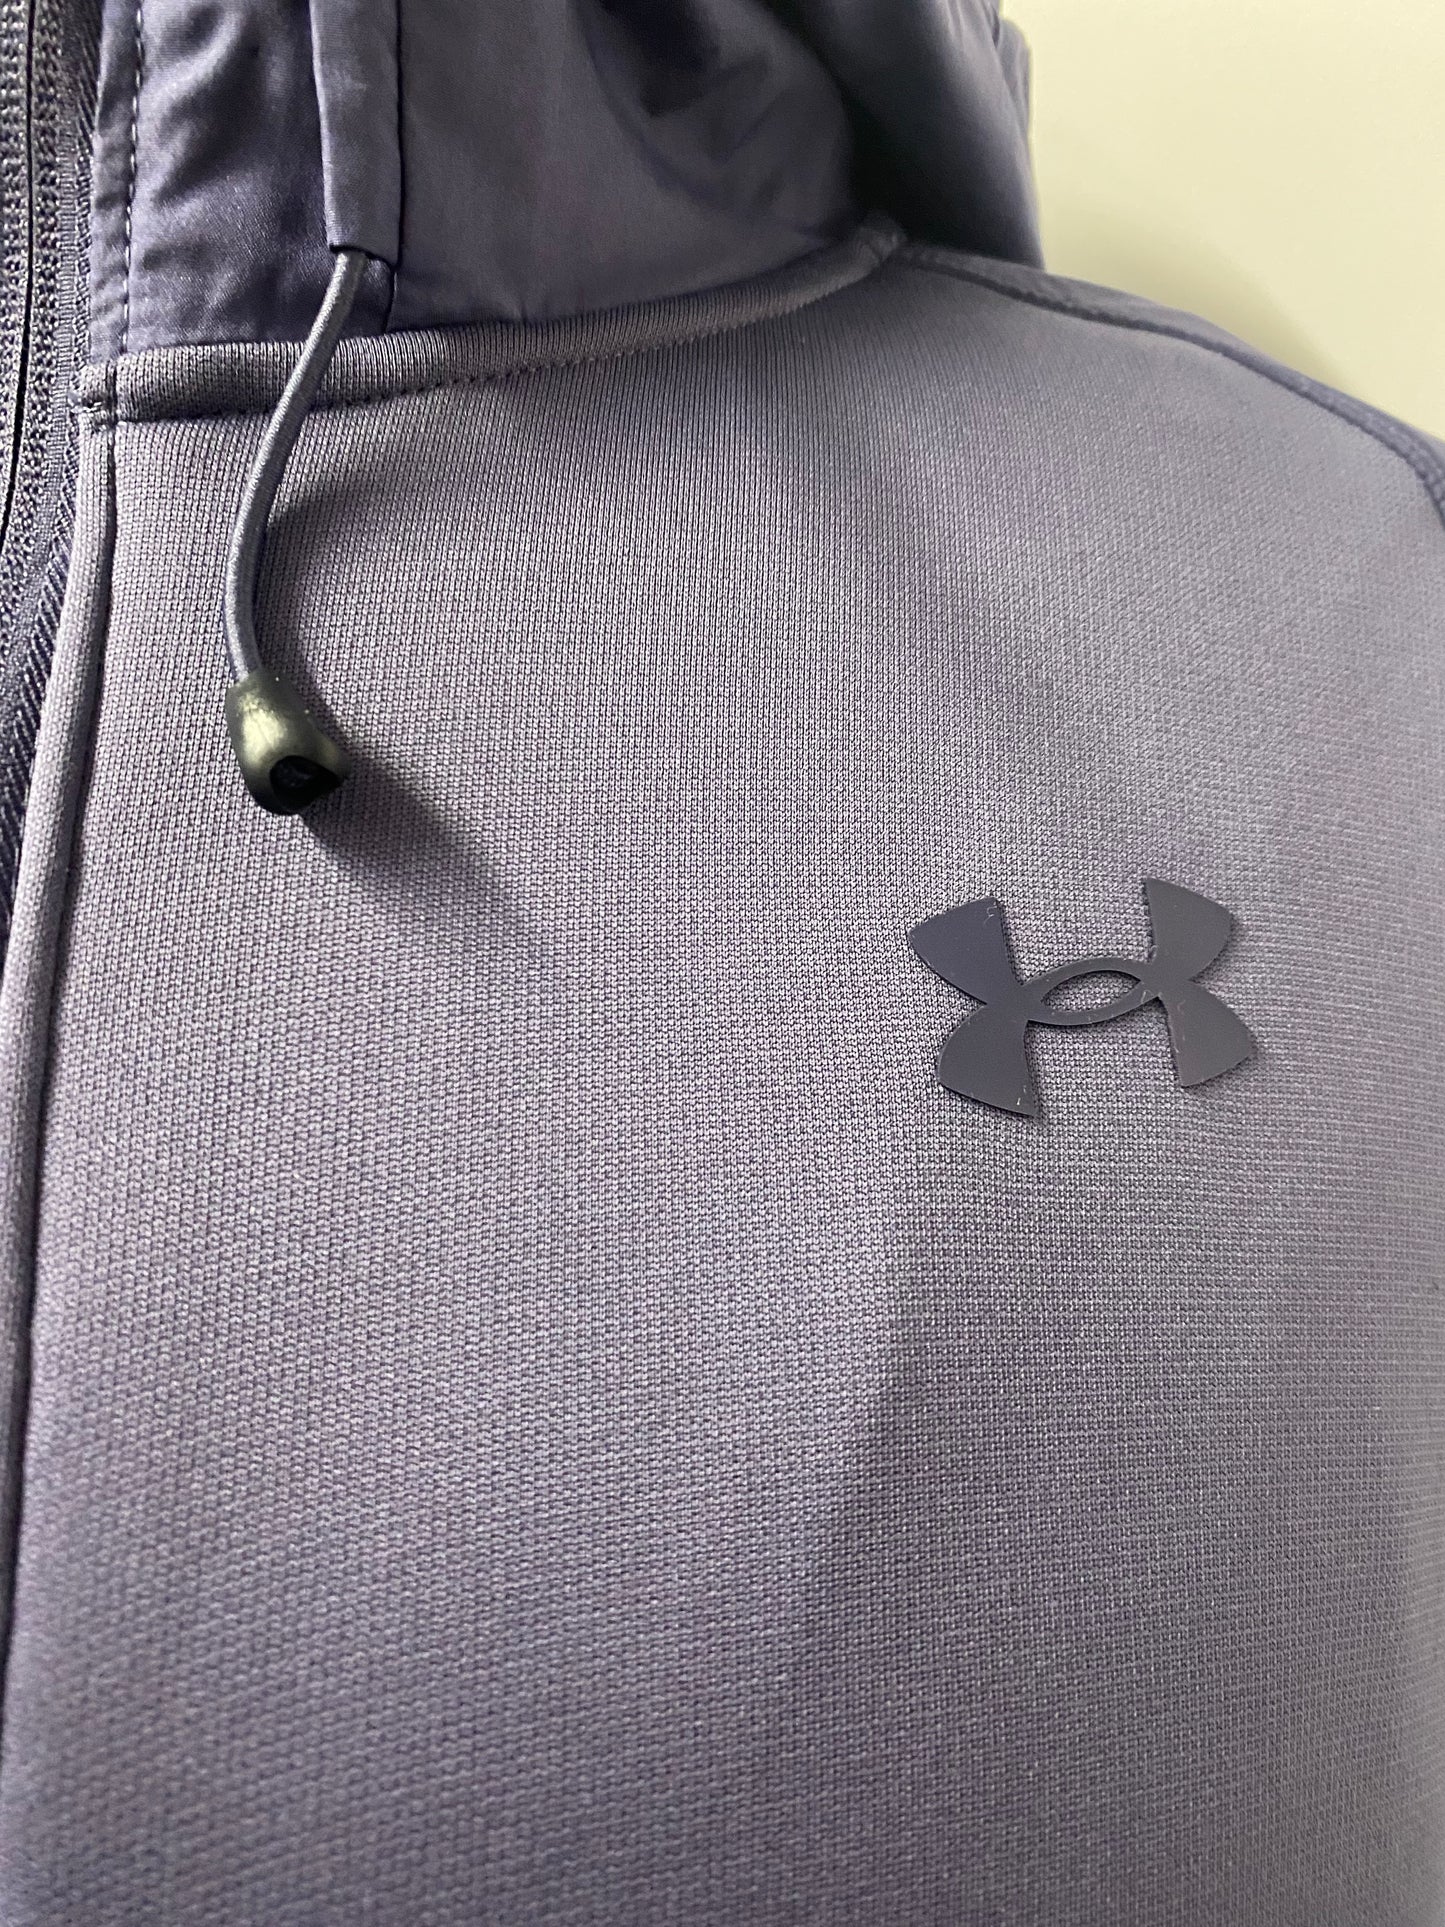 Under Armour Blue Hooded Sports Jacket Large